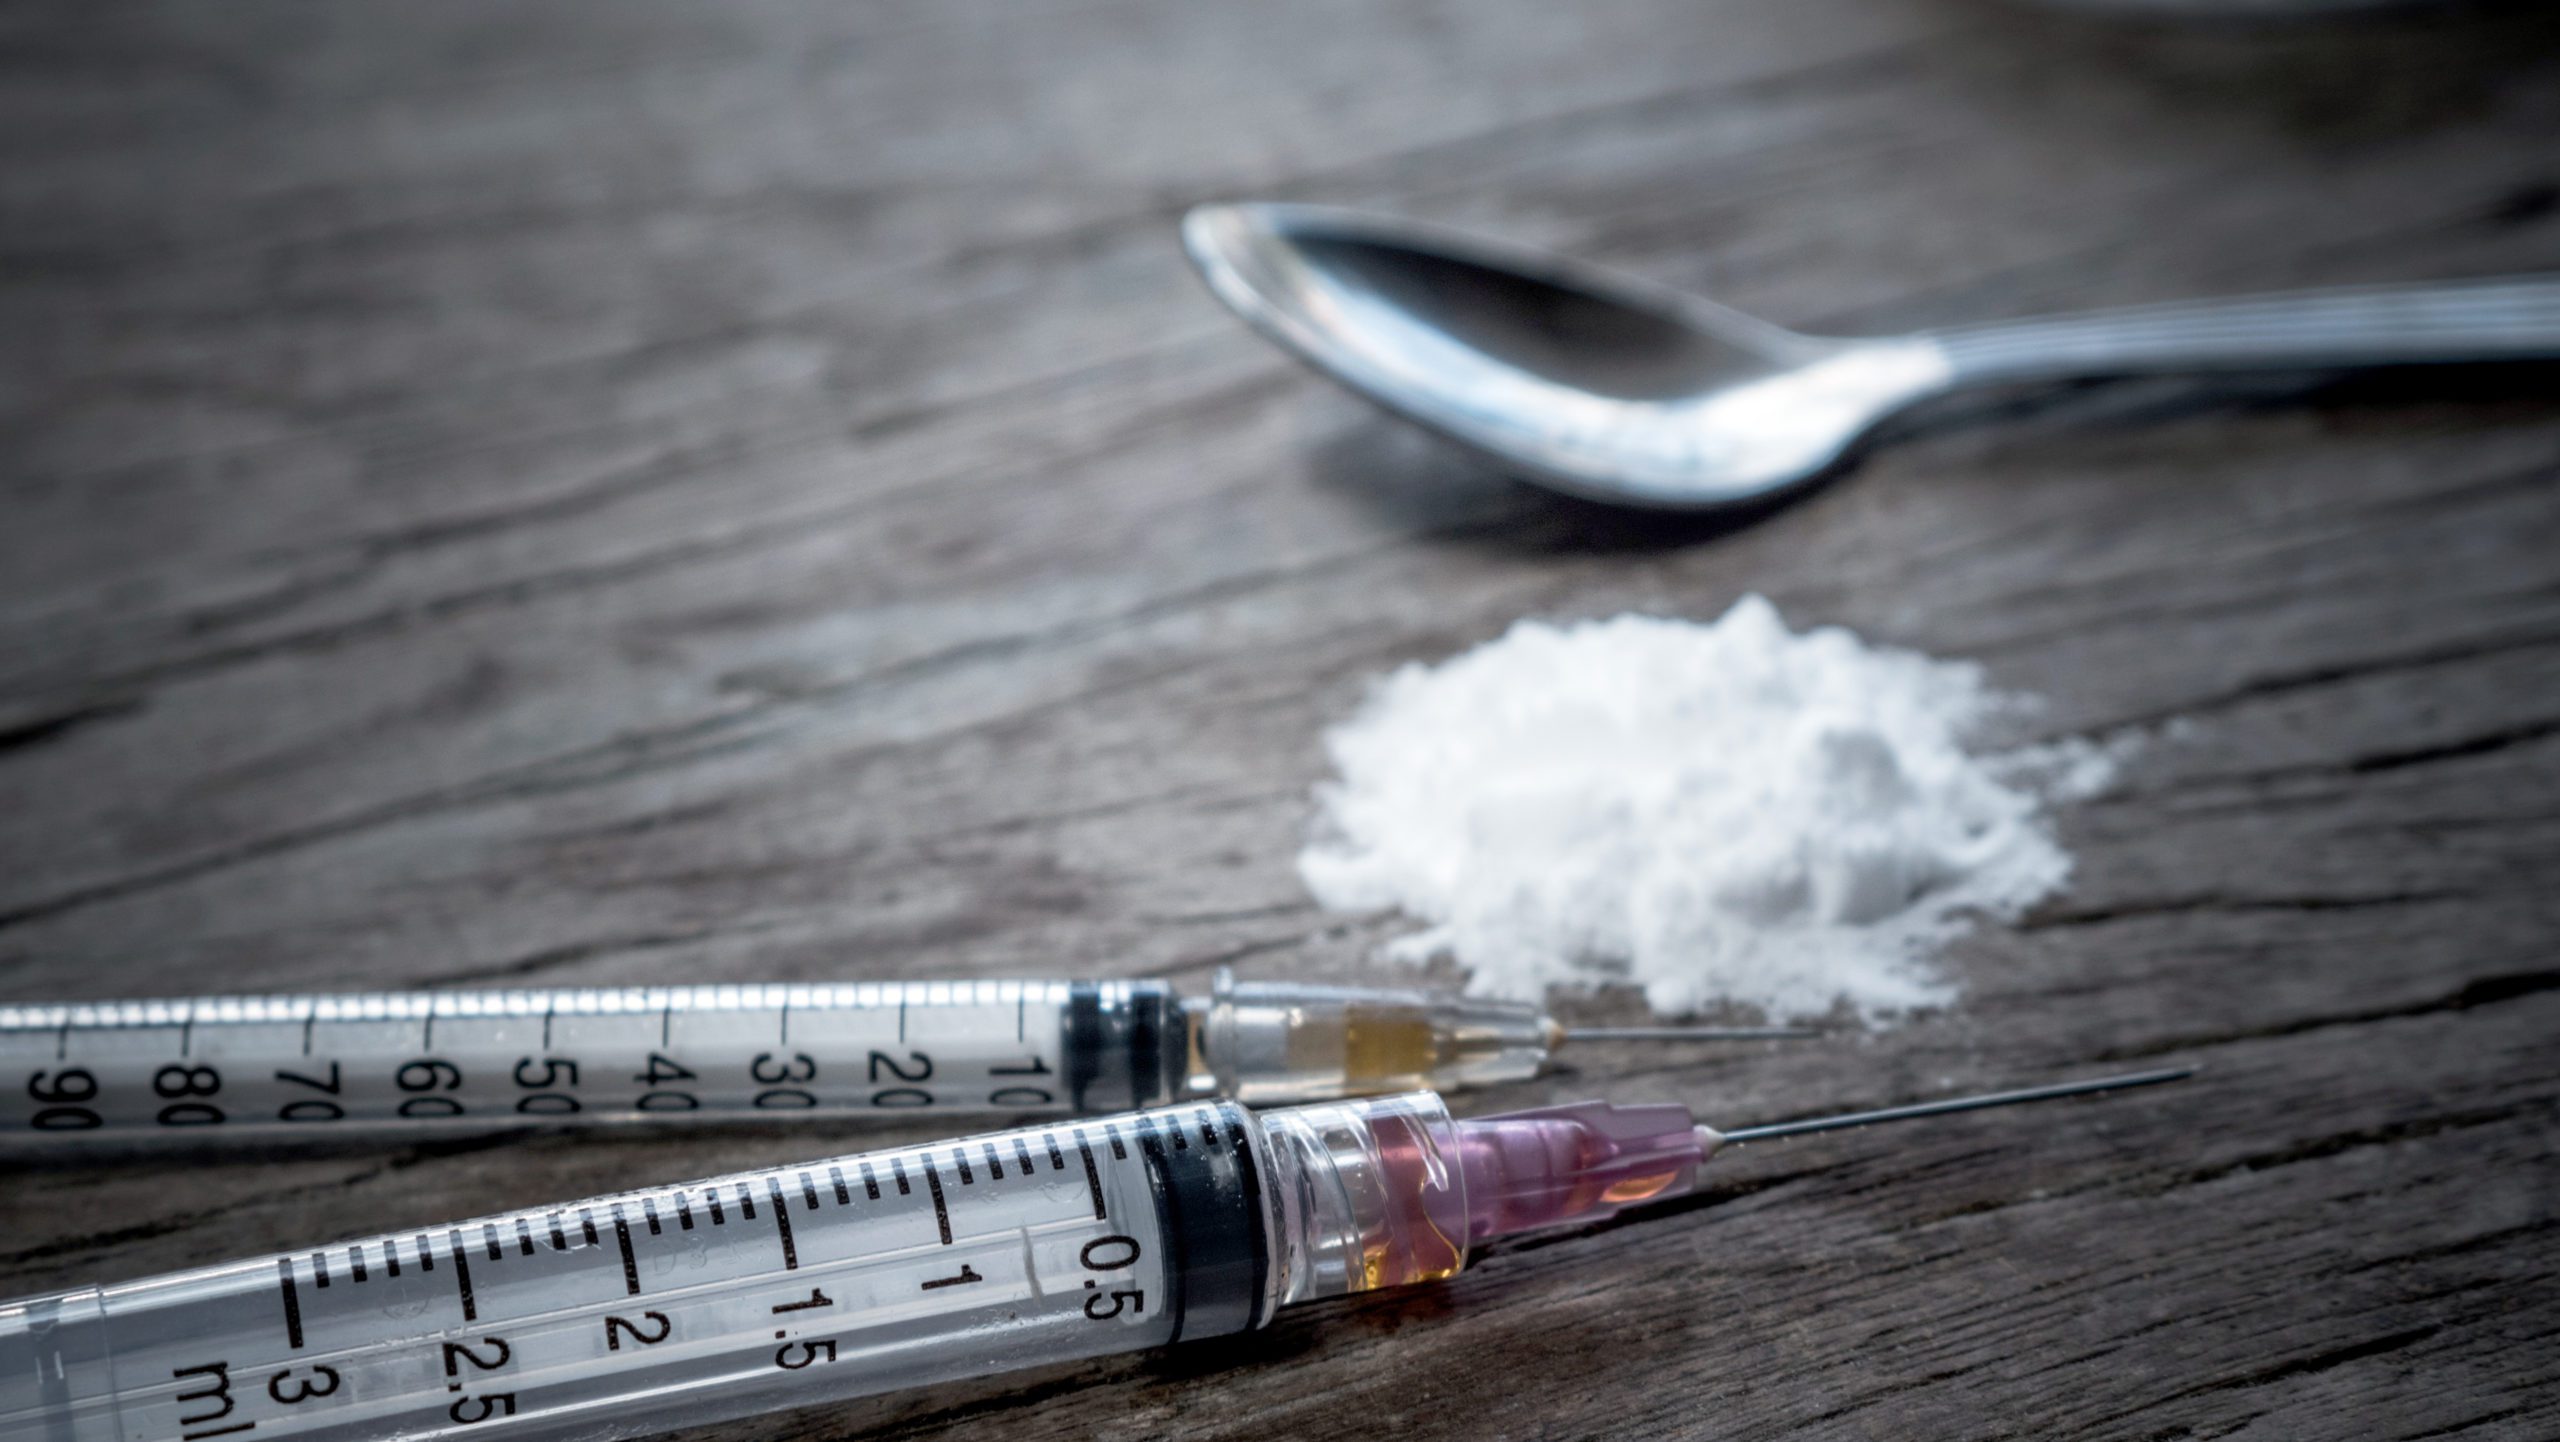 What is Fentanyl?